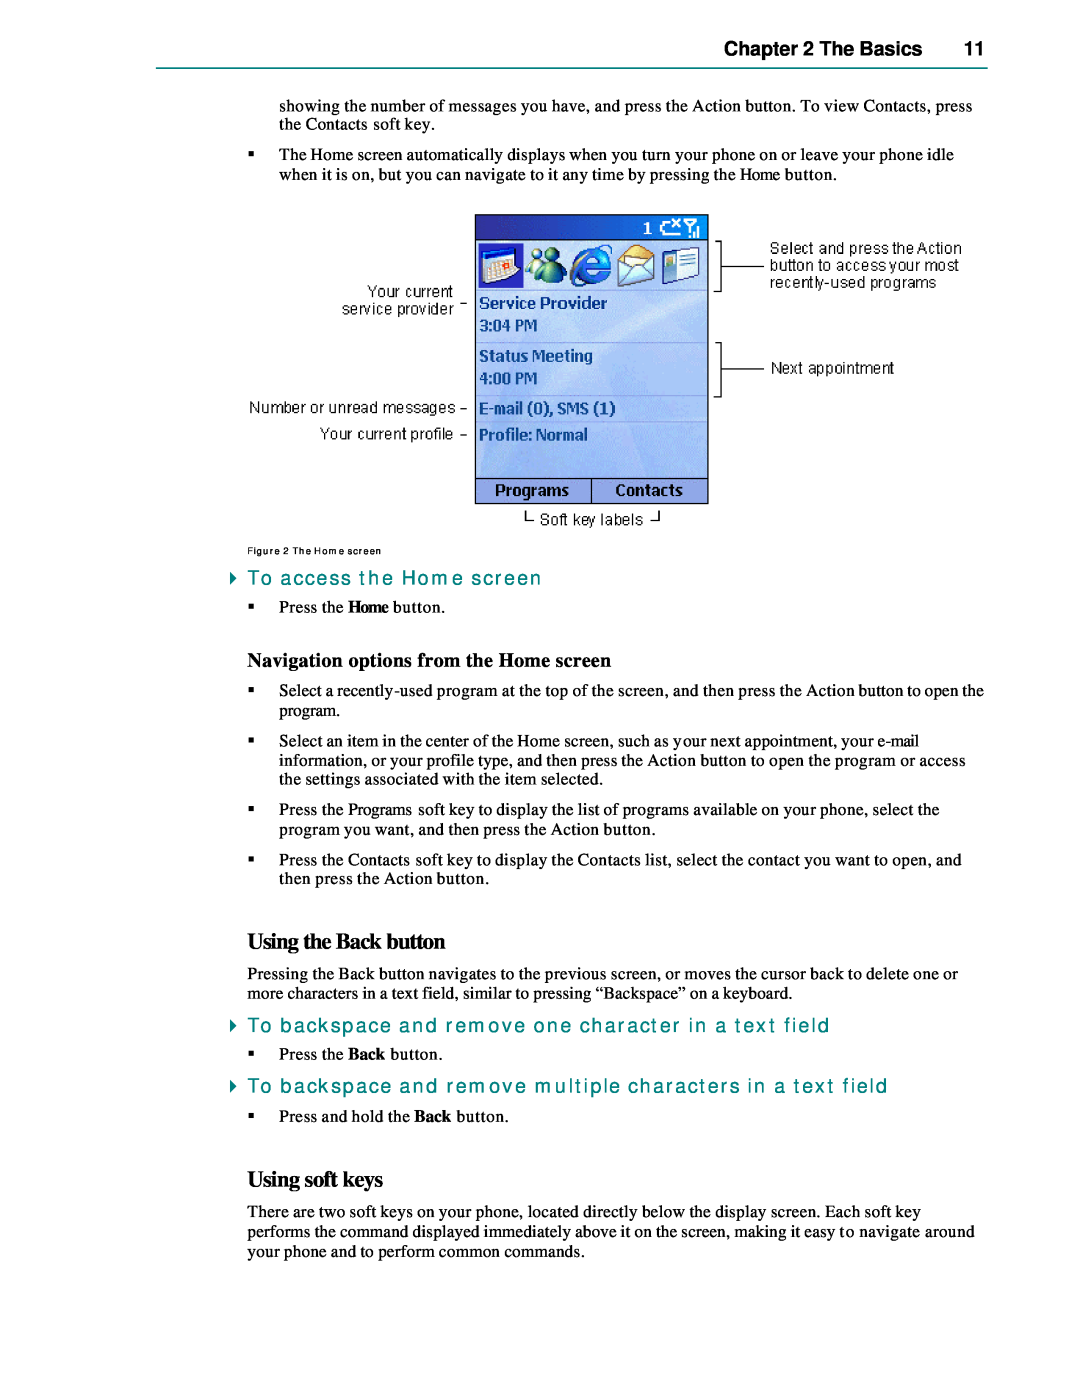 Microsoft Smartphone 2002 manual Using the Back button, Using soft keys, The Basics, To access the Home screen 